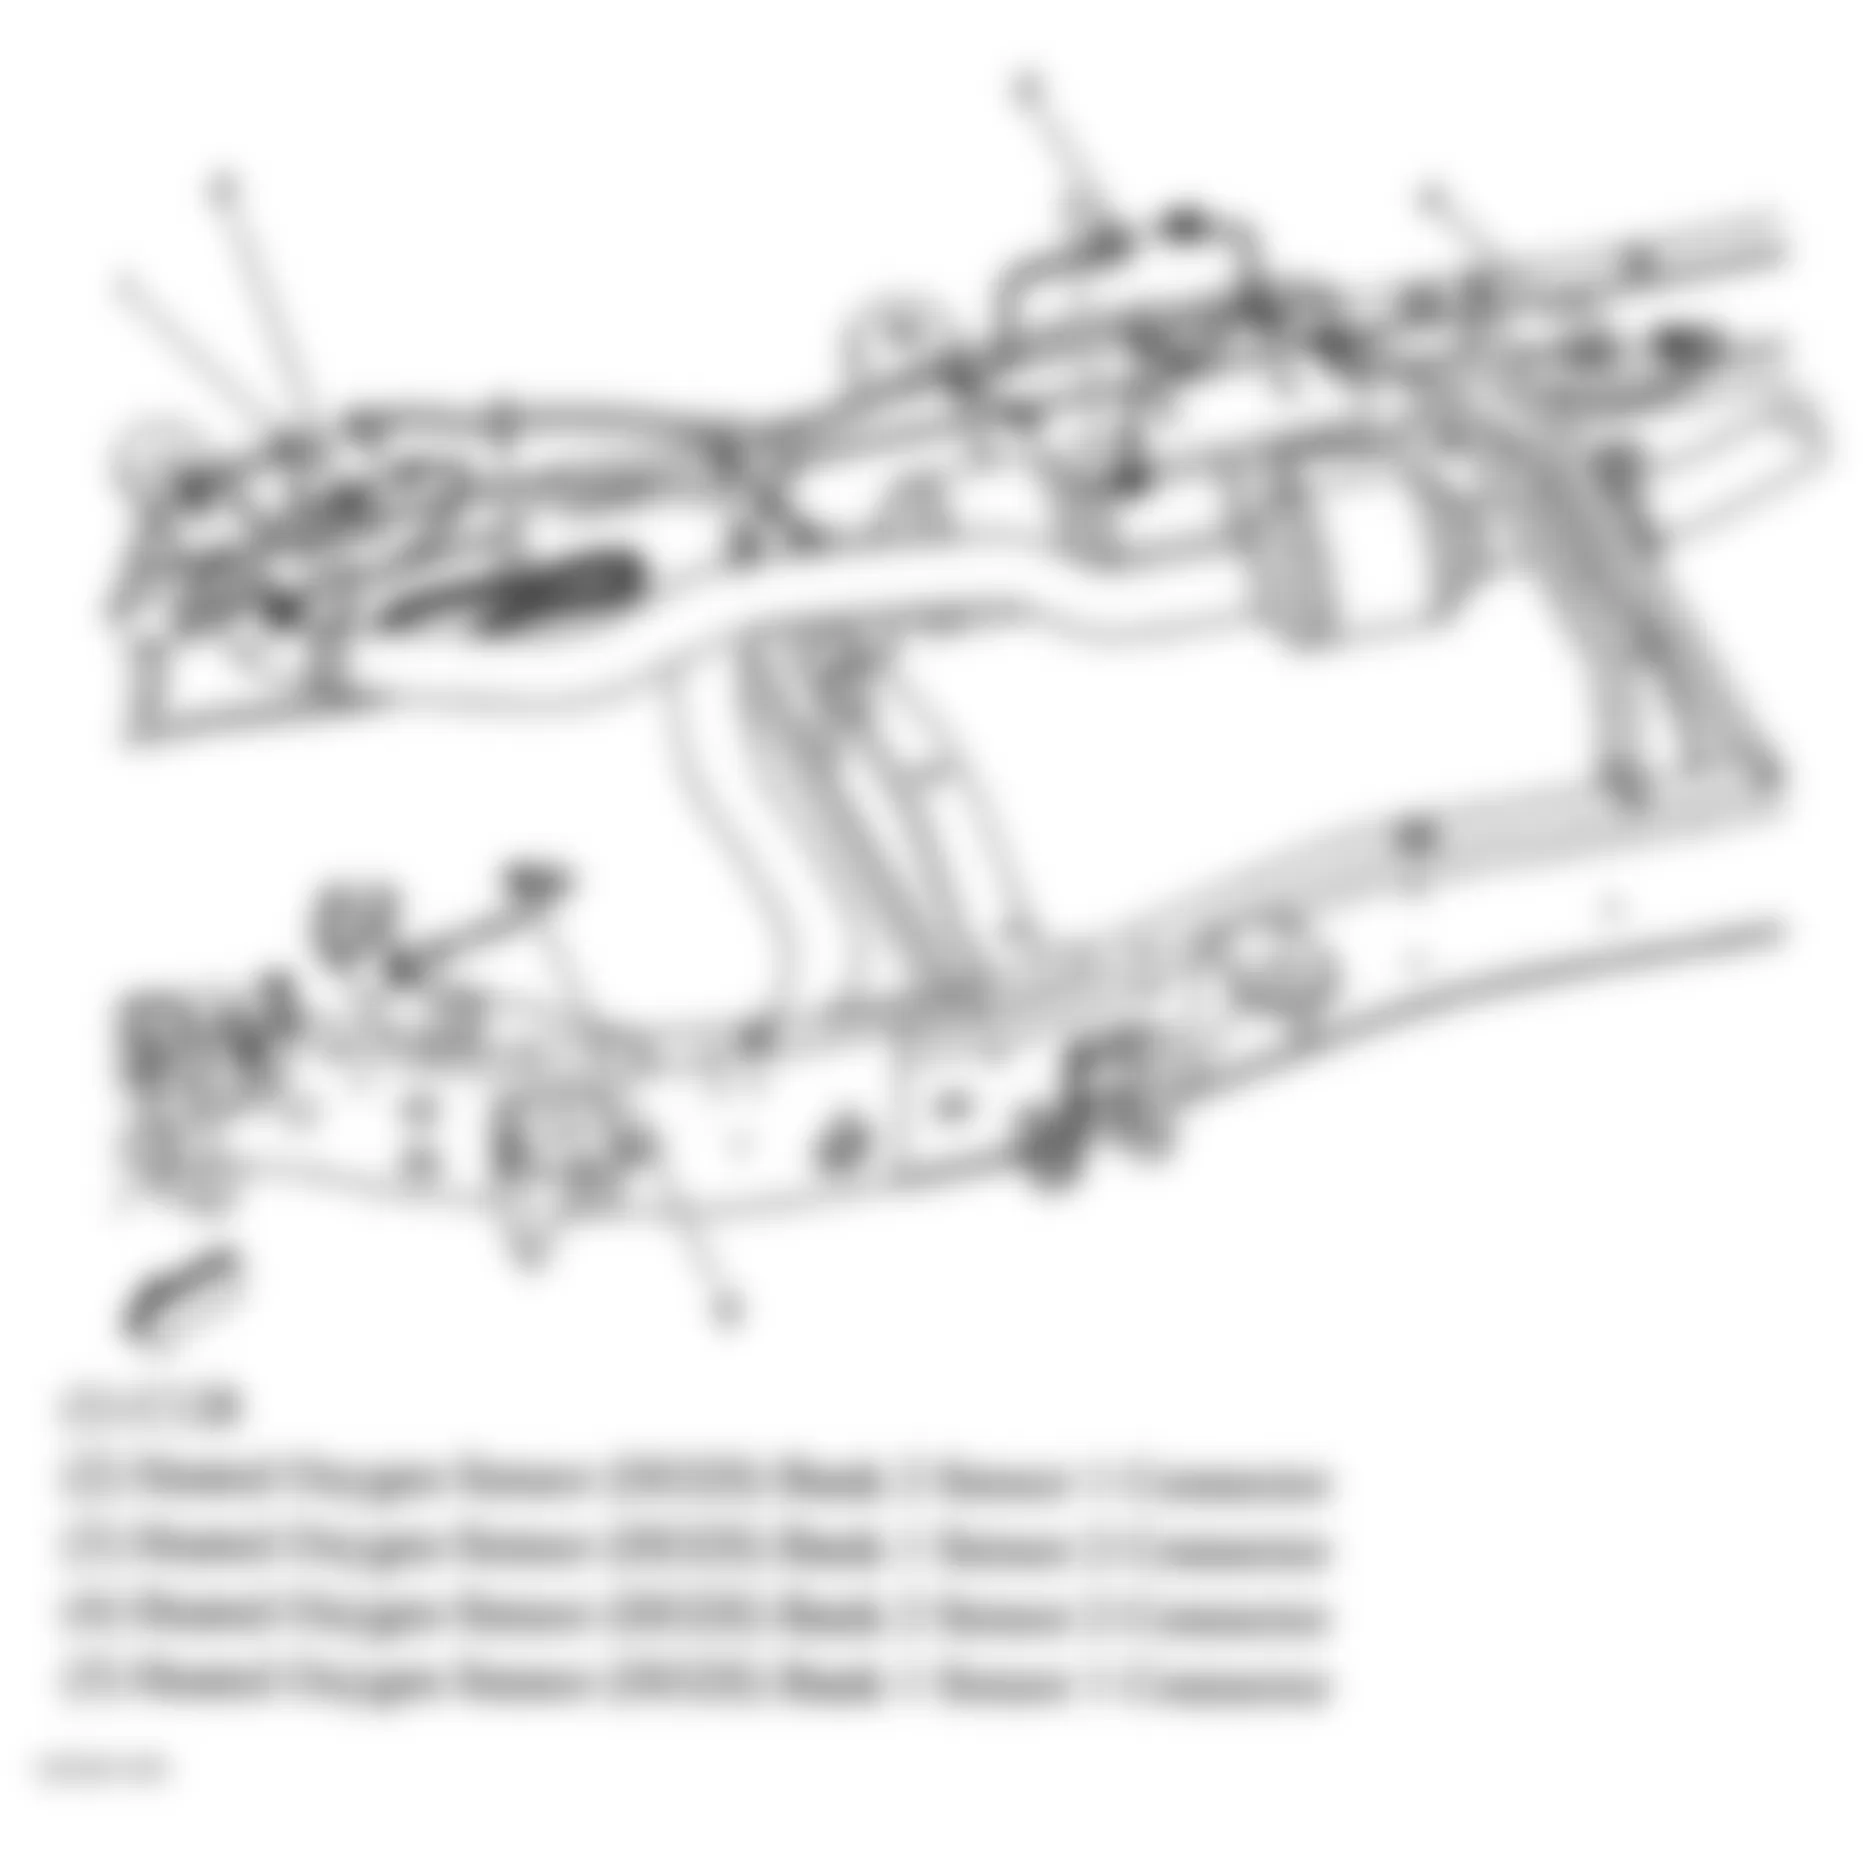 GMC Savana G3500 2004 - Component Locations -  Center Of Chassis